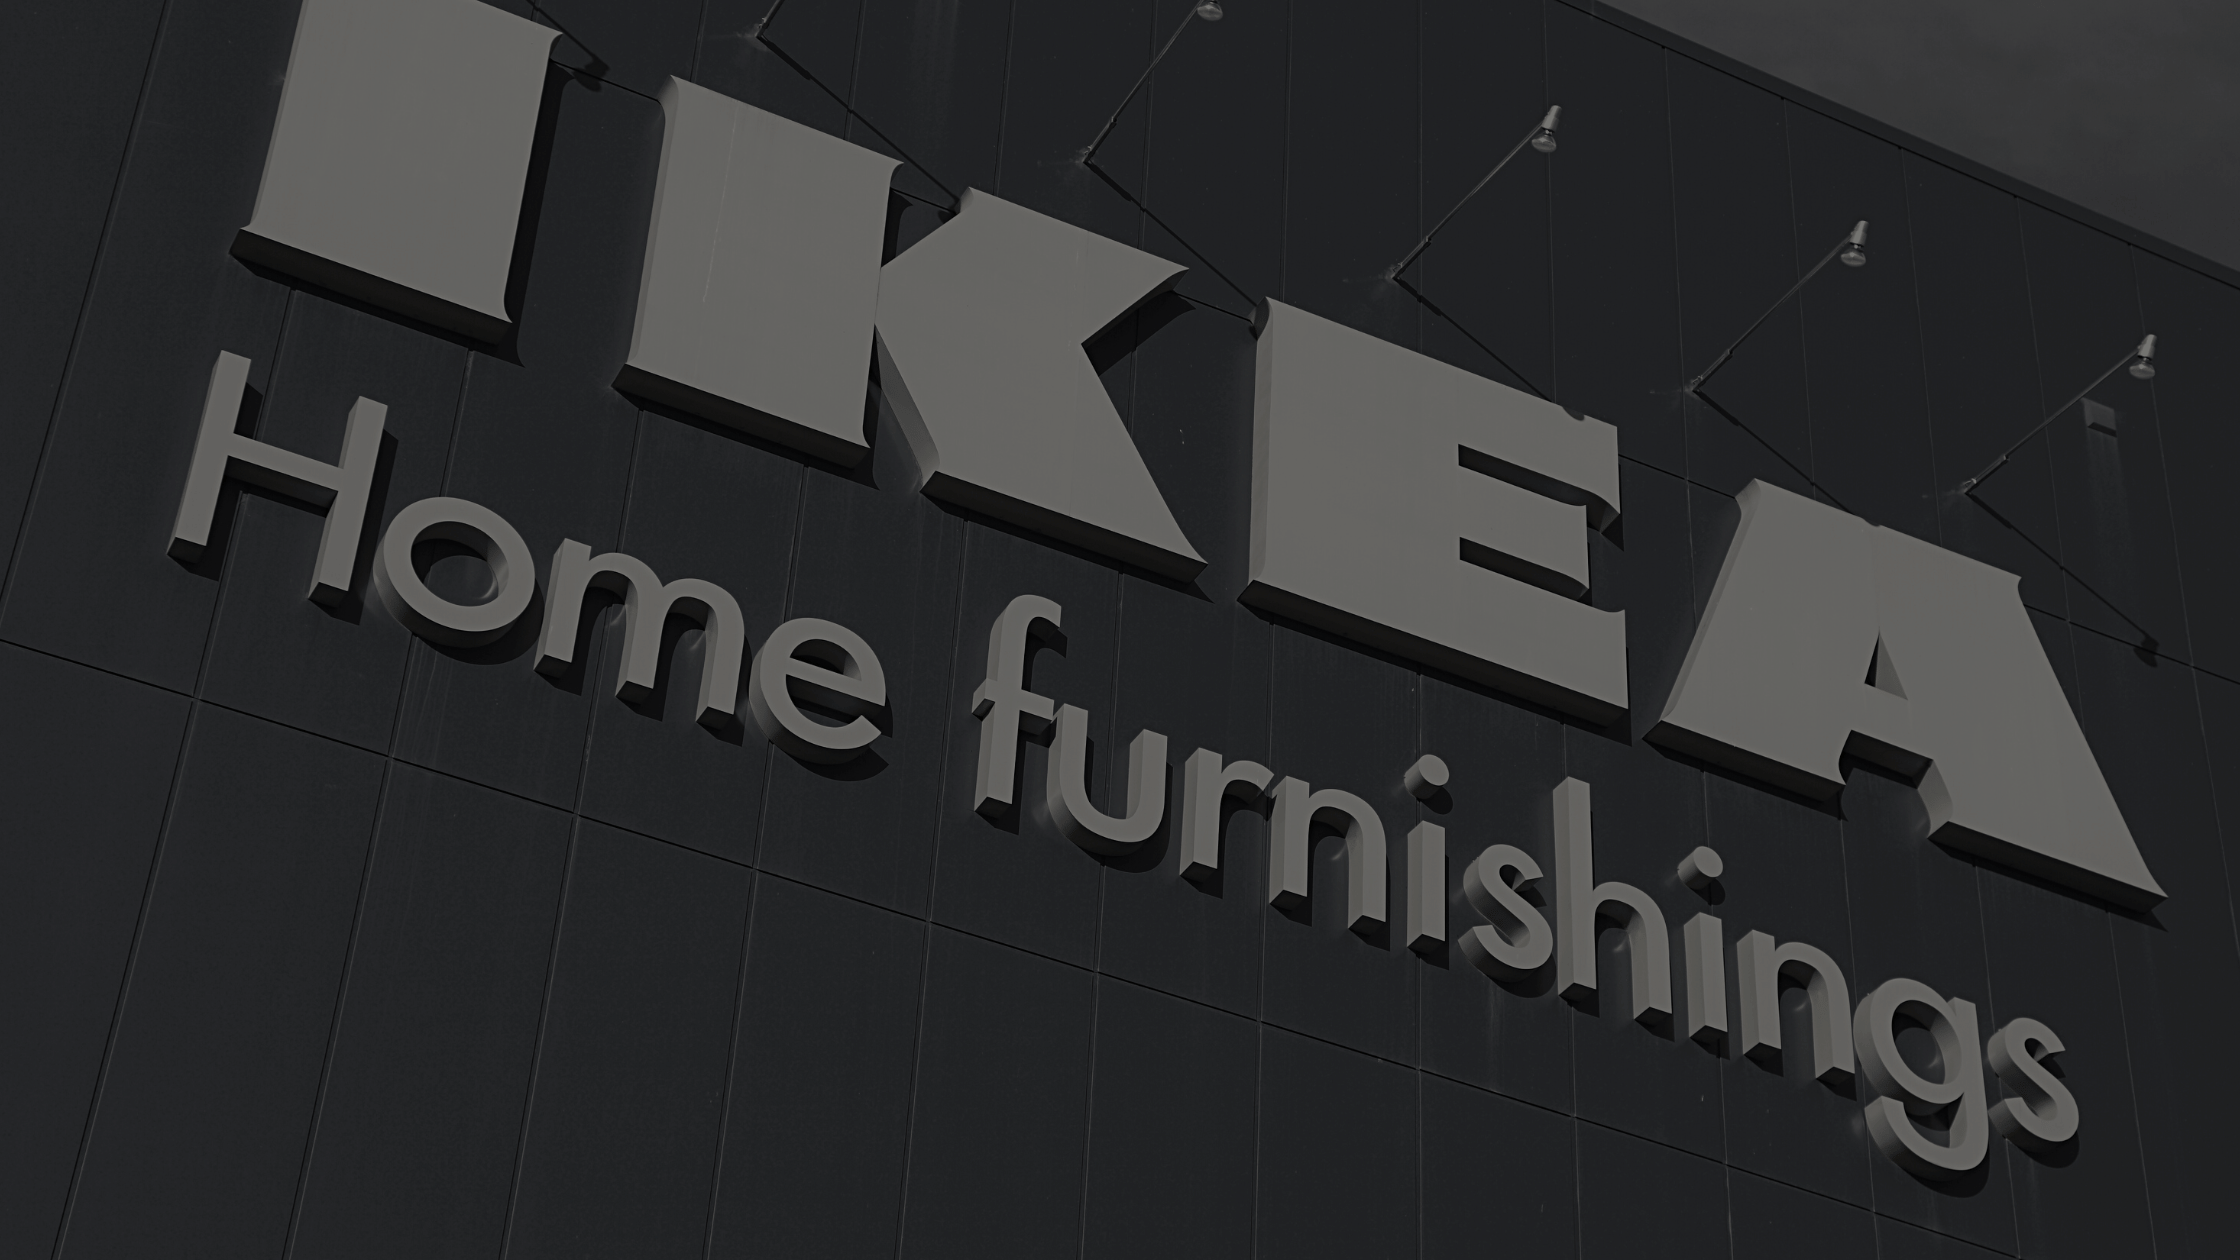 4 hilarious and witty marketing campaigns from IKEA